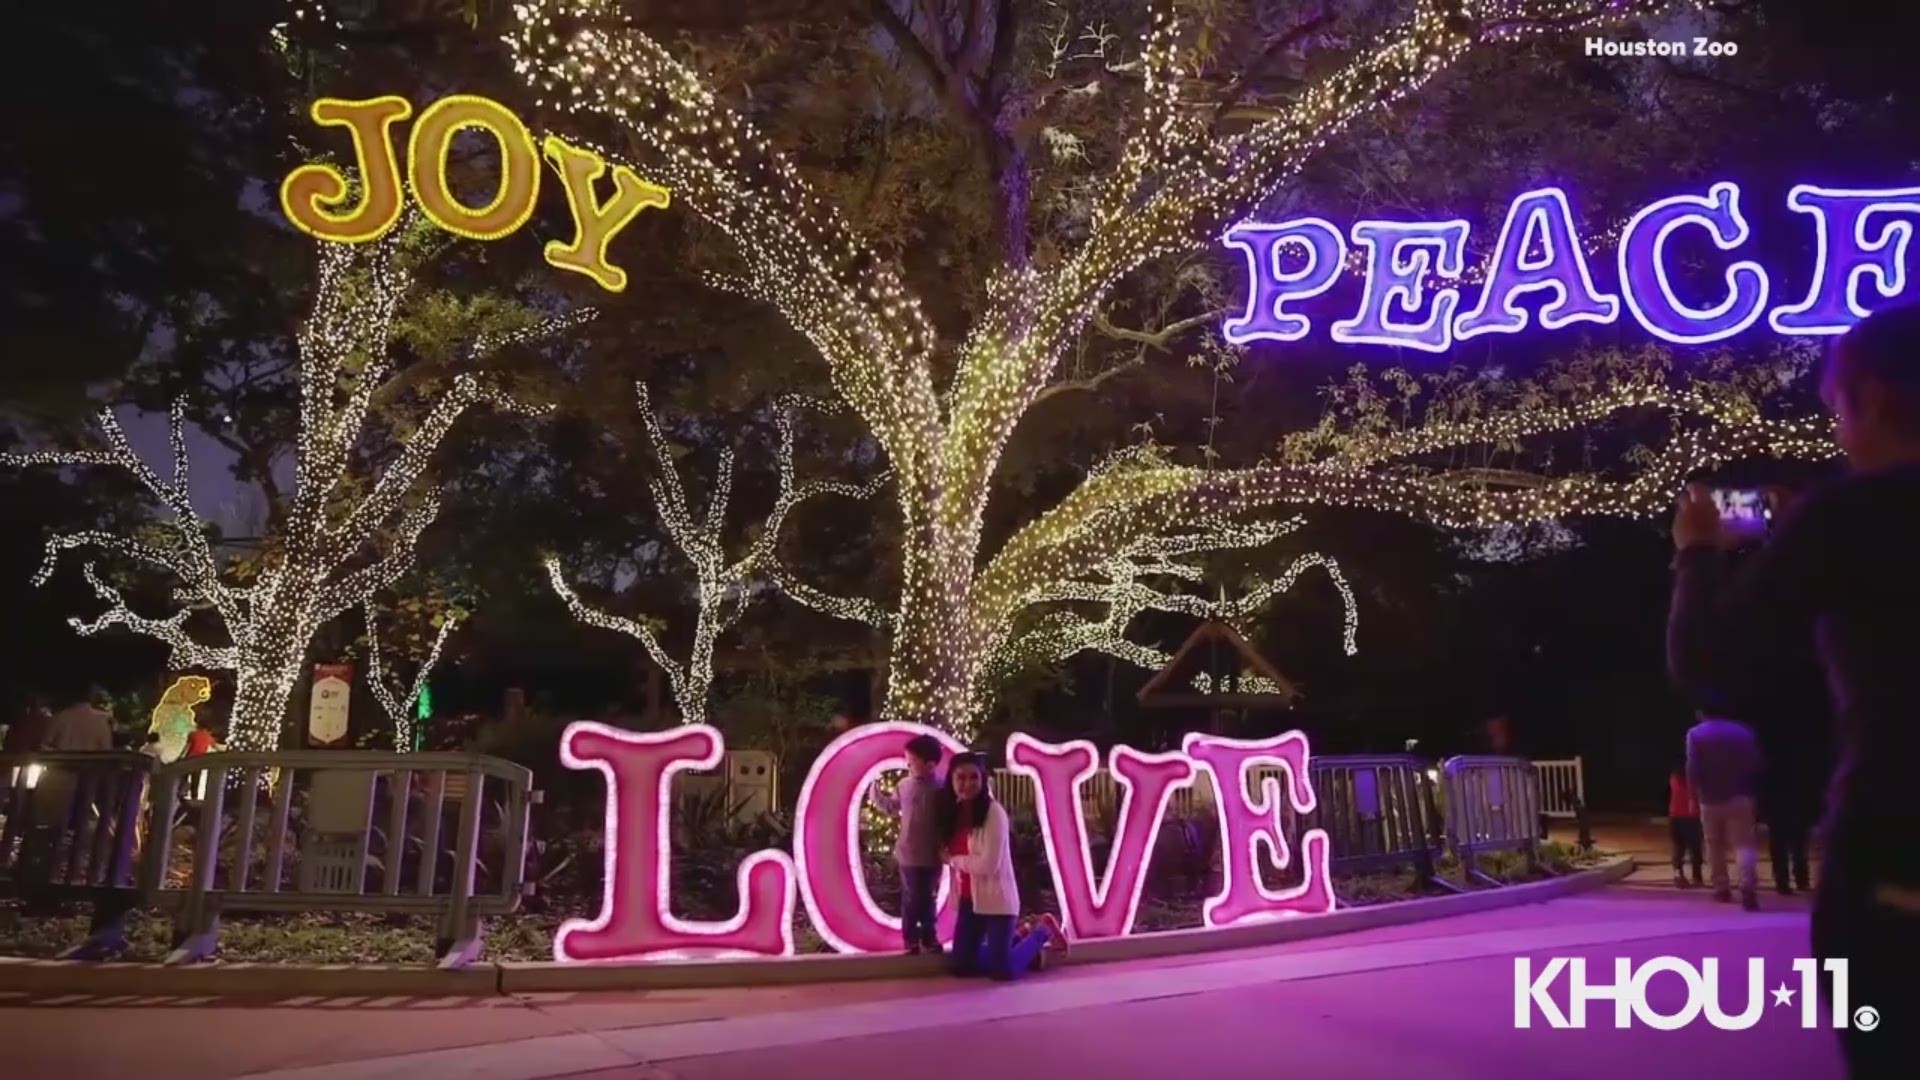 From Nov. 26 through Jan. 12, the Houston Zoo is transformed into a winter wonderland, and one of Houston’s most well-loved holiday traditions.